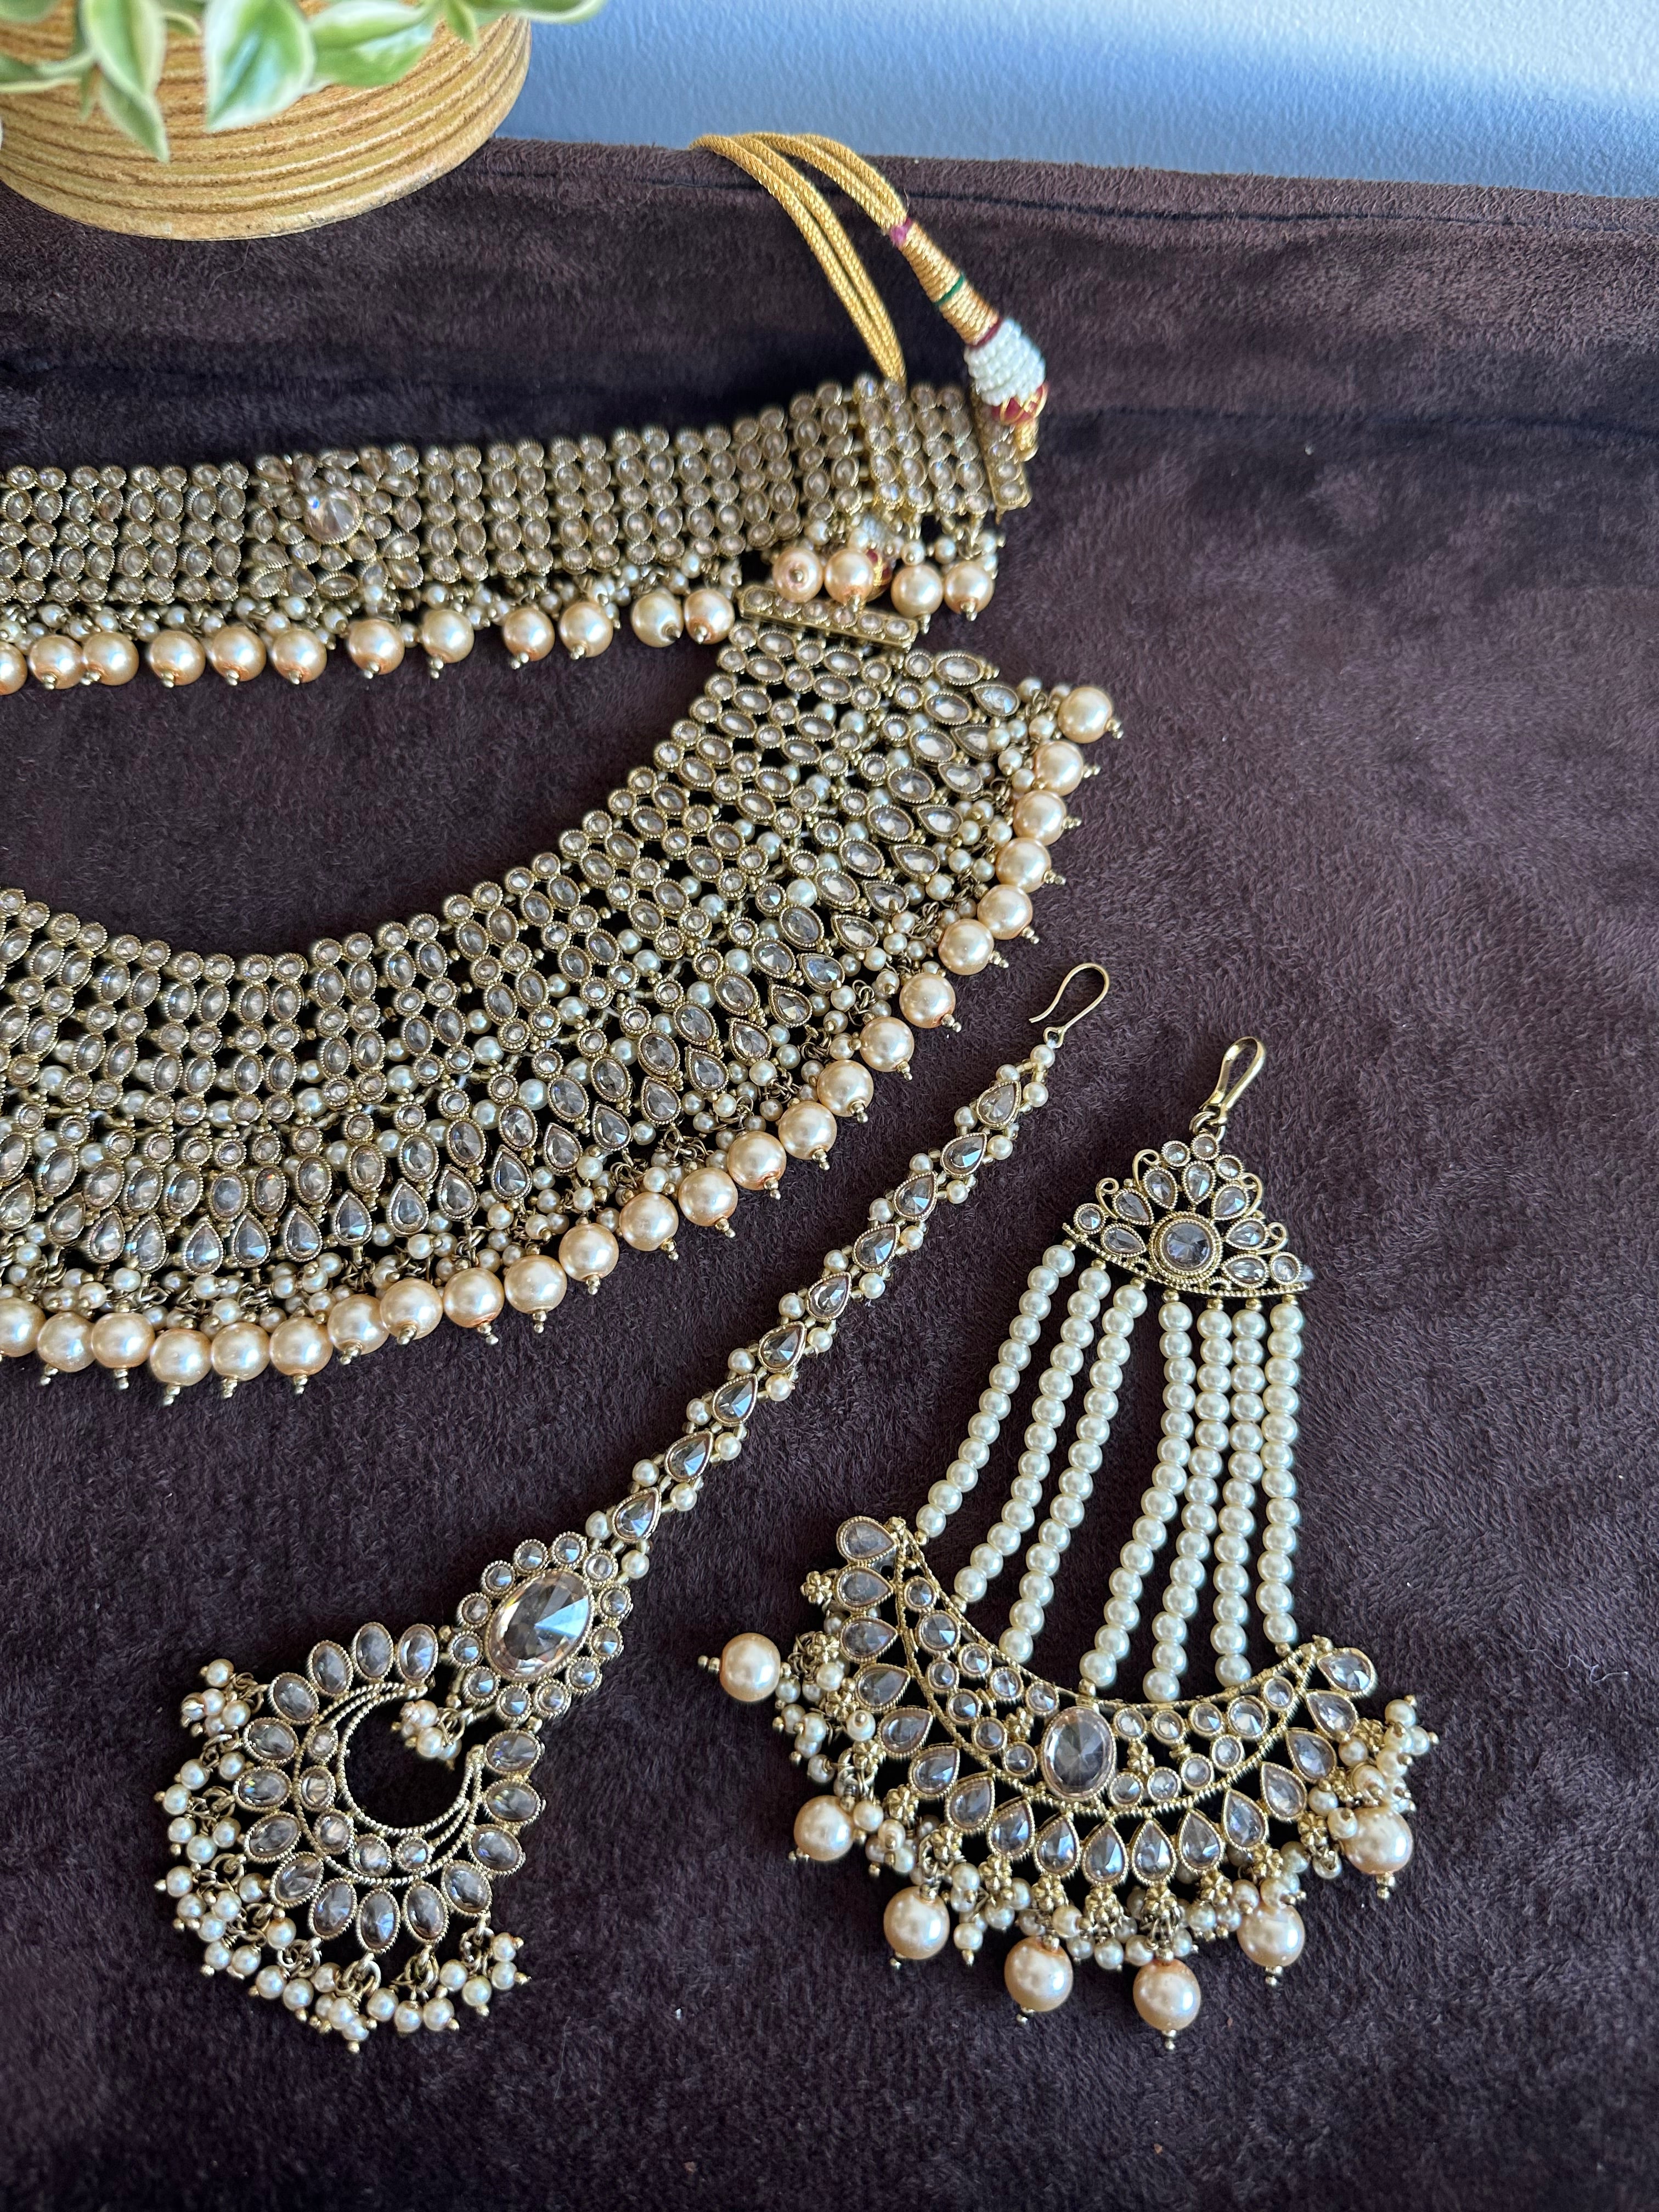 The Krishna Necklace set exudes opulence, pair it with your favorite lehenga or saree to achieve a regal bridal look We can customize the colors to your liking, let us know on whatsapp at +1 (313)-727-1045 if you have any questions. We are very proud of our highest quality and specialized craftsmanship. 